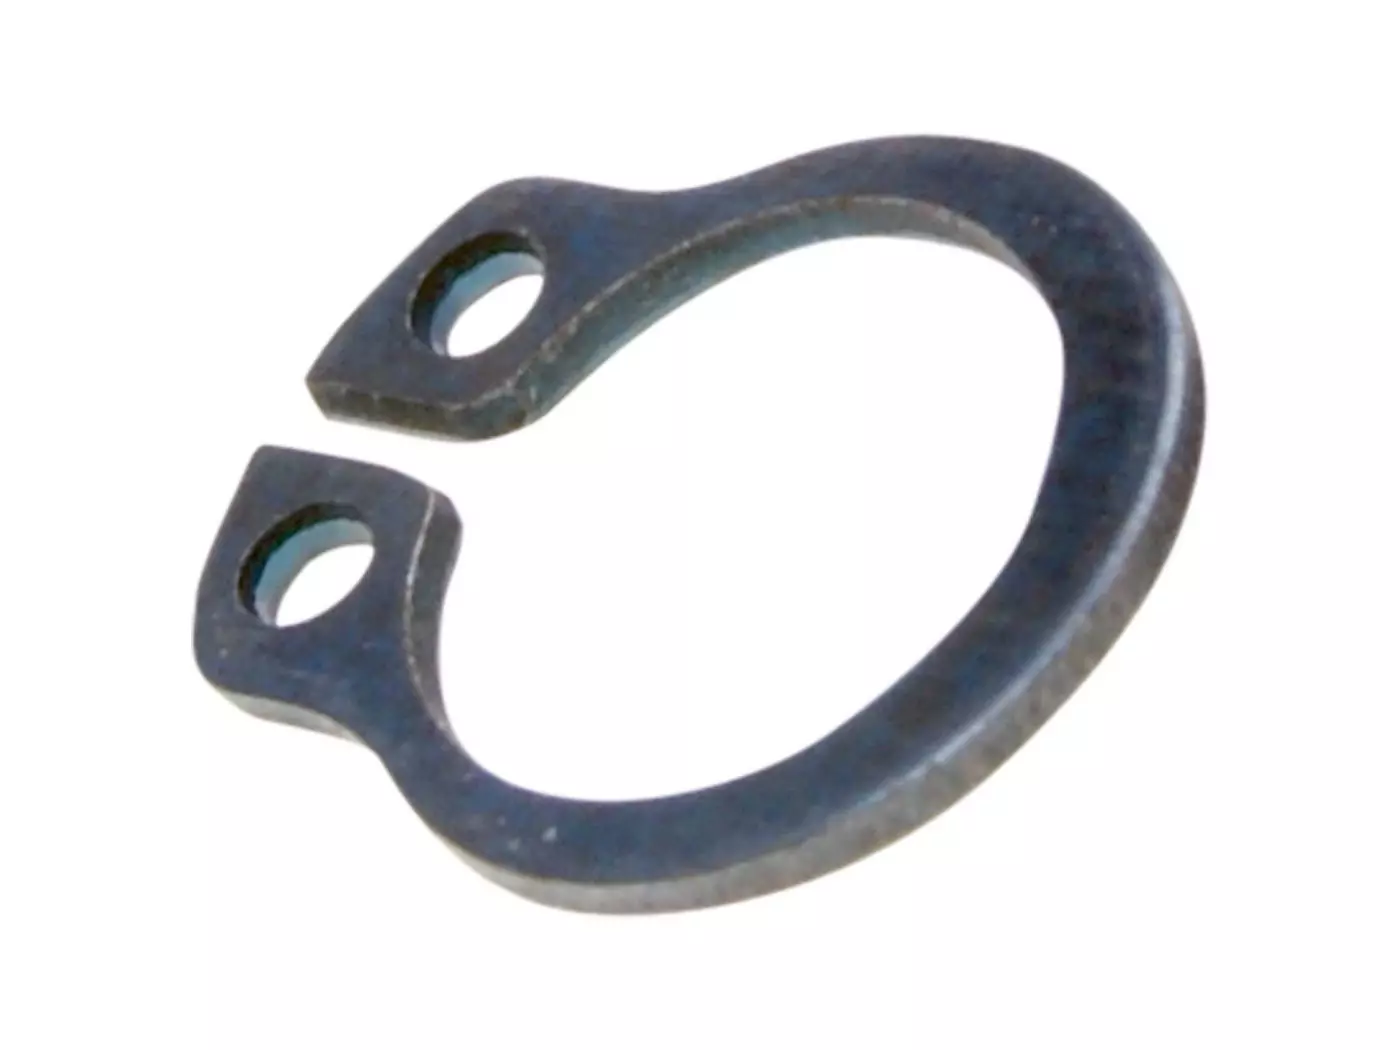 Circlip / Snap Ring OEM Outer D7 (07x9.5x0.5)